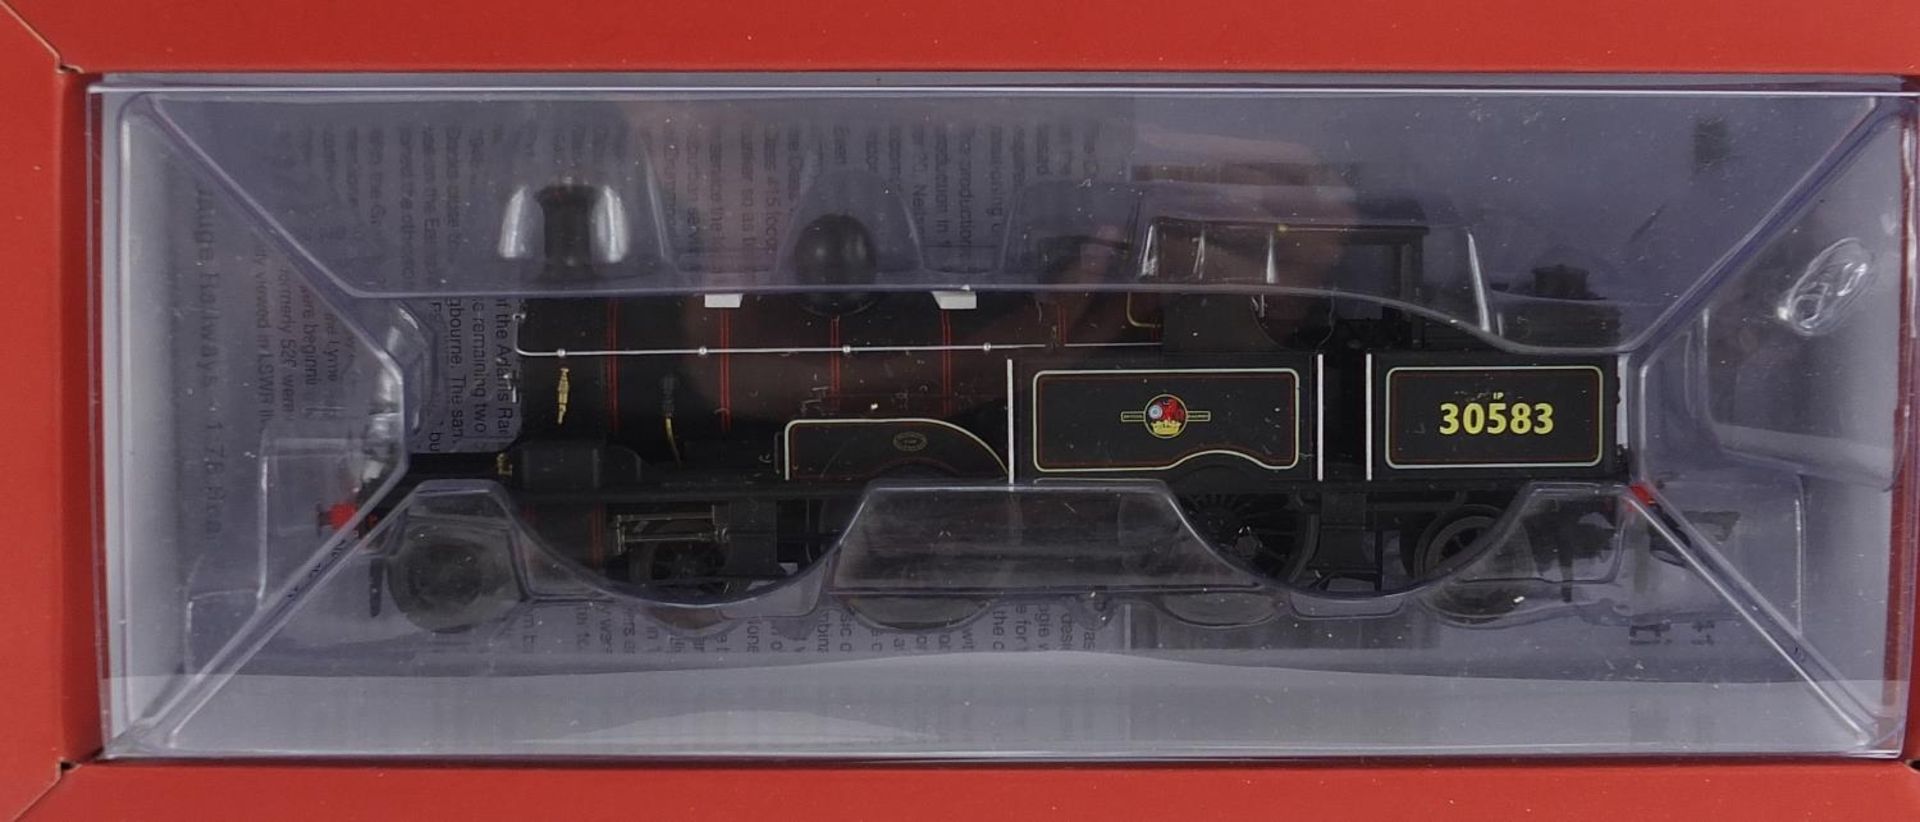 Two Oxford Rail 00 gauge model railway locomotives with boxes, numbers 30583 and 30584 - Image 4 of 5